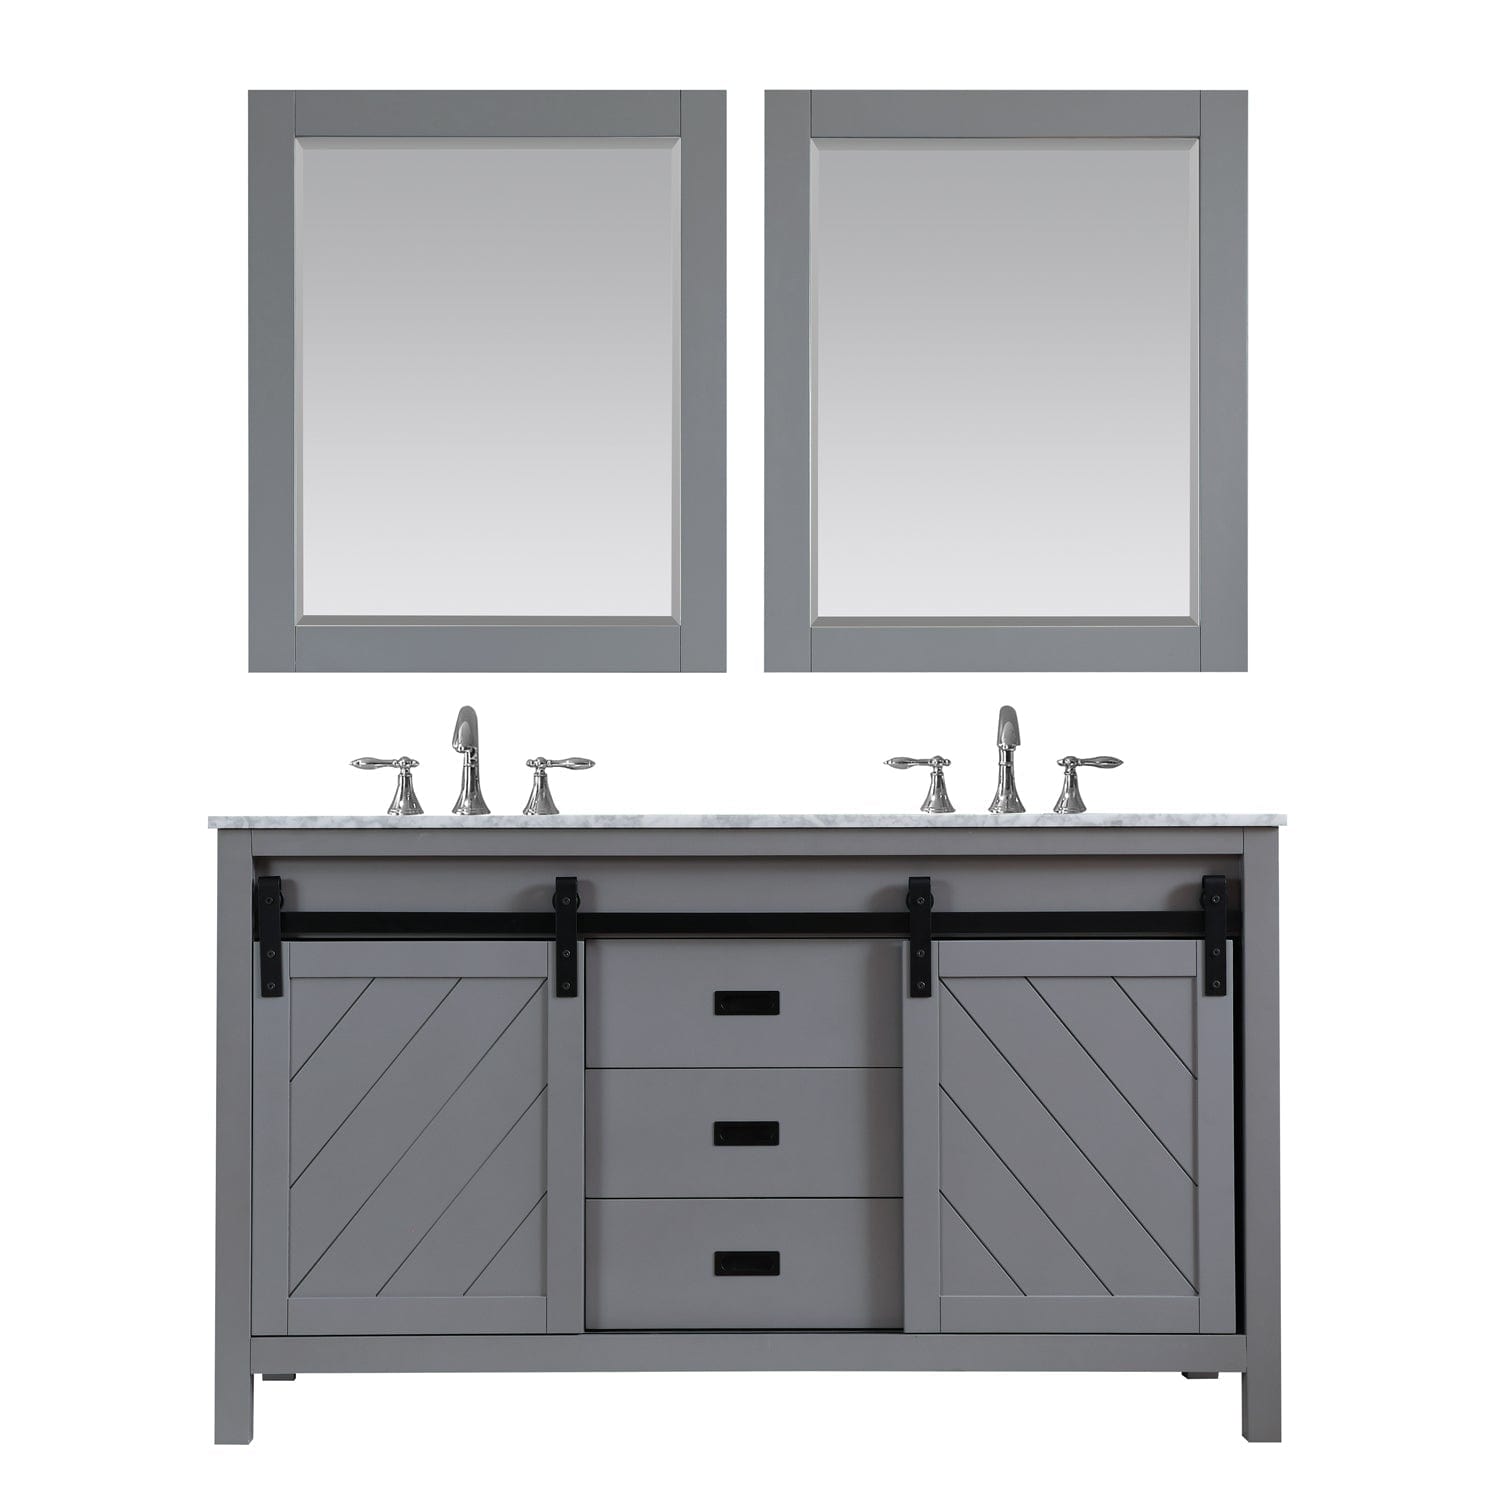 Altair Kinsley 60" Double Bathroom Vanity Set in Gray and Carrara White Marble Countertop with Mirror 536060-GR-CA - Molaix631112970518Vanity536060-GR-CA